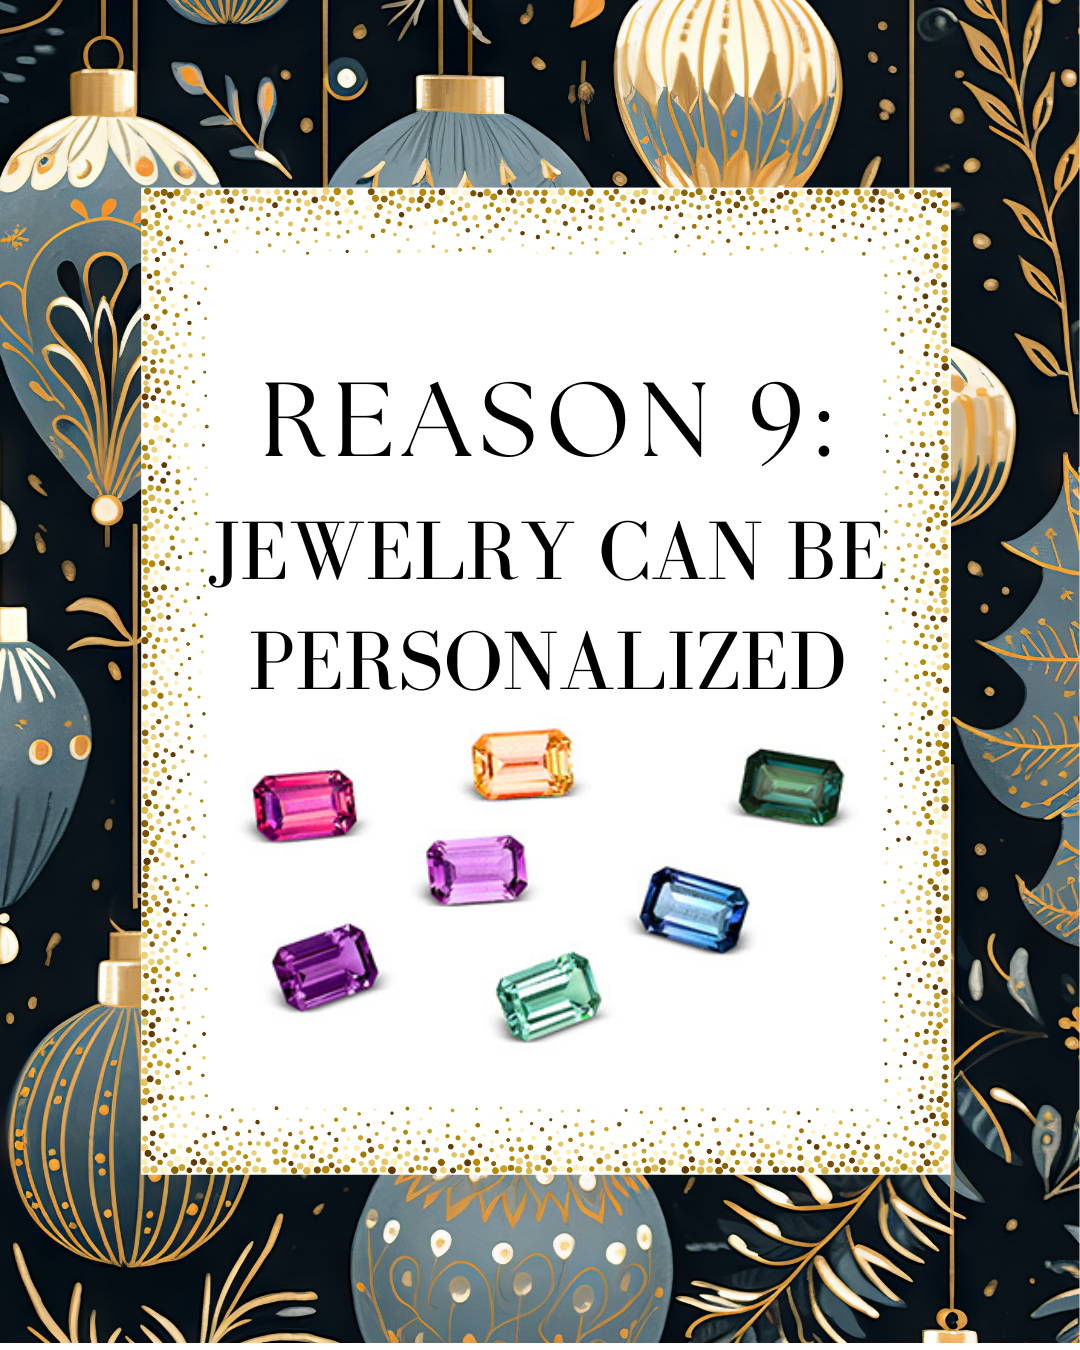 Jewelry is a wonderful gift because it can be personalized. Many colored gemsetones that are emerald cut. Pink and purple sapphires, spinel, aquamarine and tourmaline.